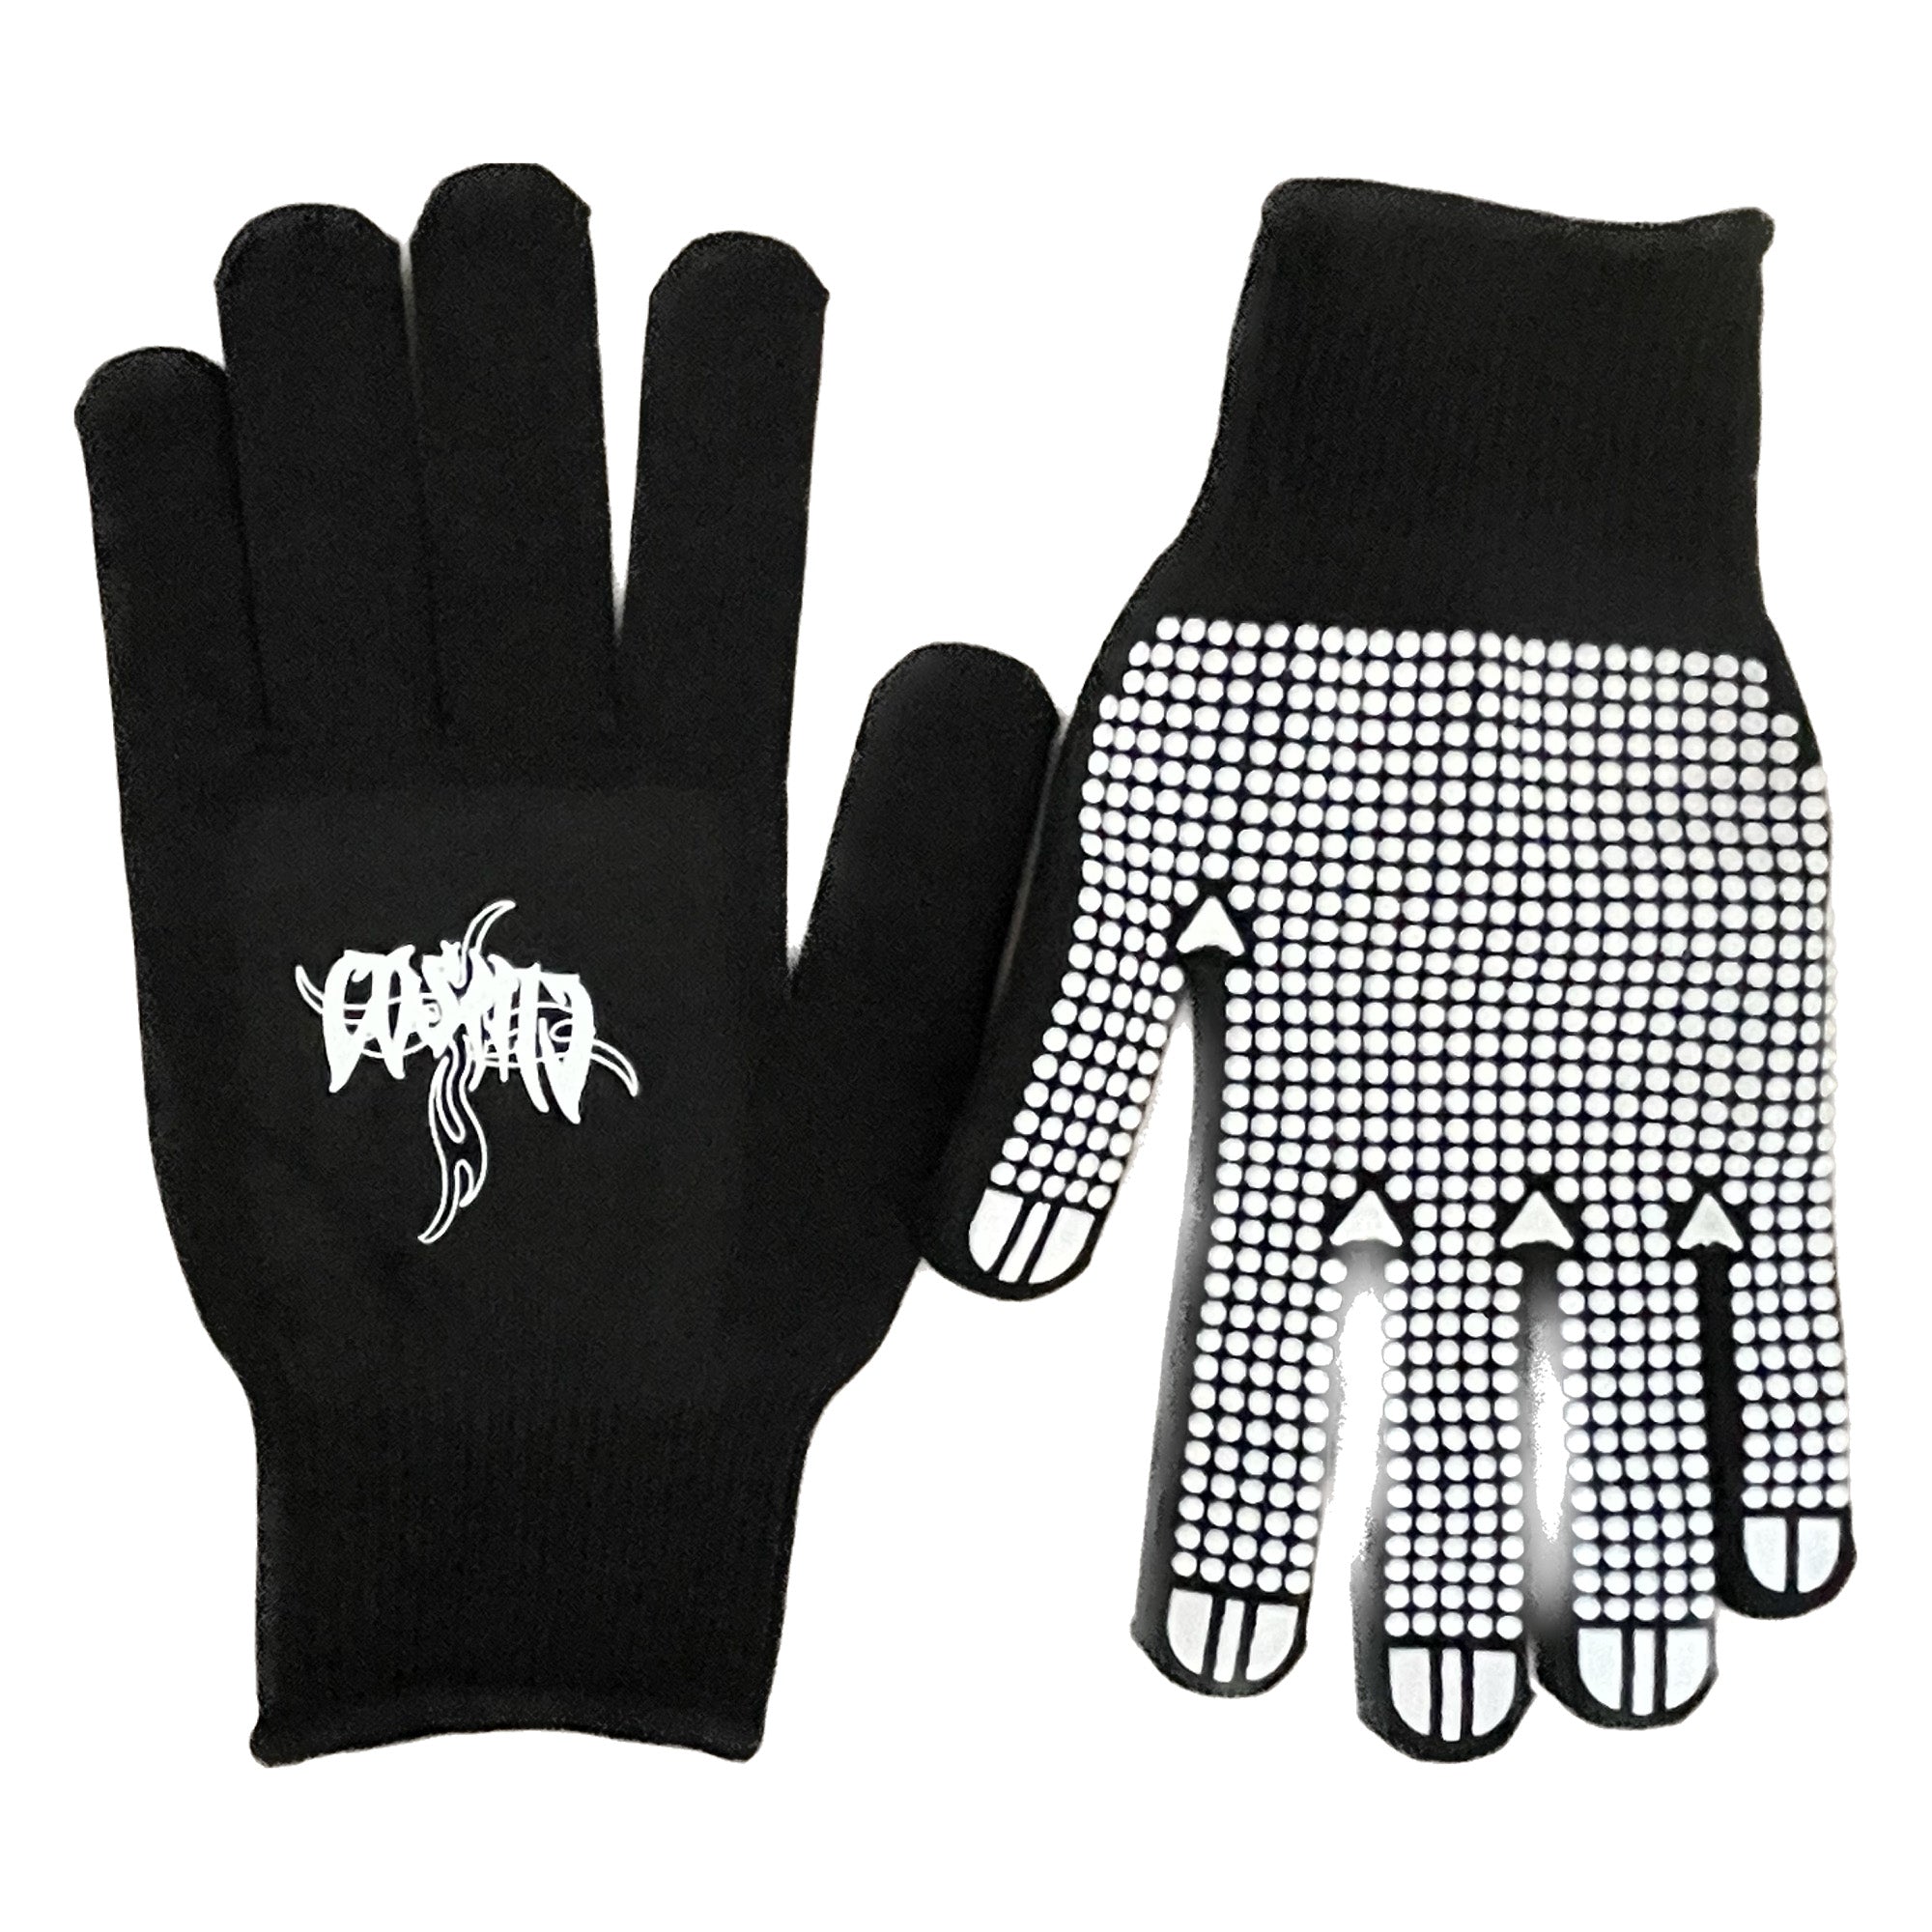 Cosmic the Oasis knit gloves, available in black and red, are made from durable poly material with rubber pads on the palms and fingers. Lightweight and breathable, they offer style and comfort.